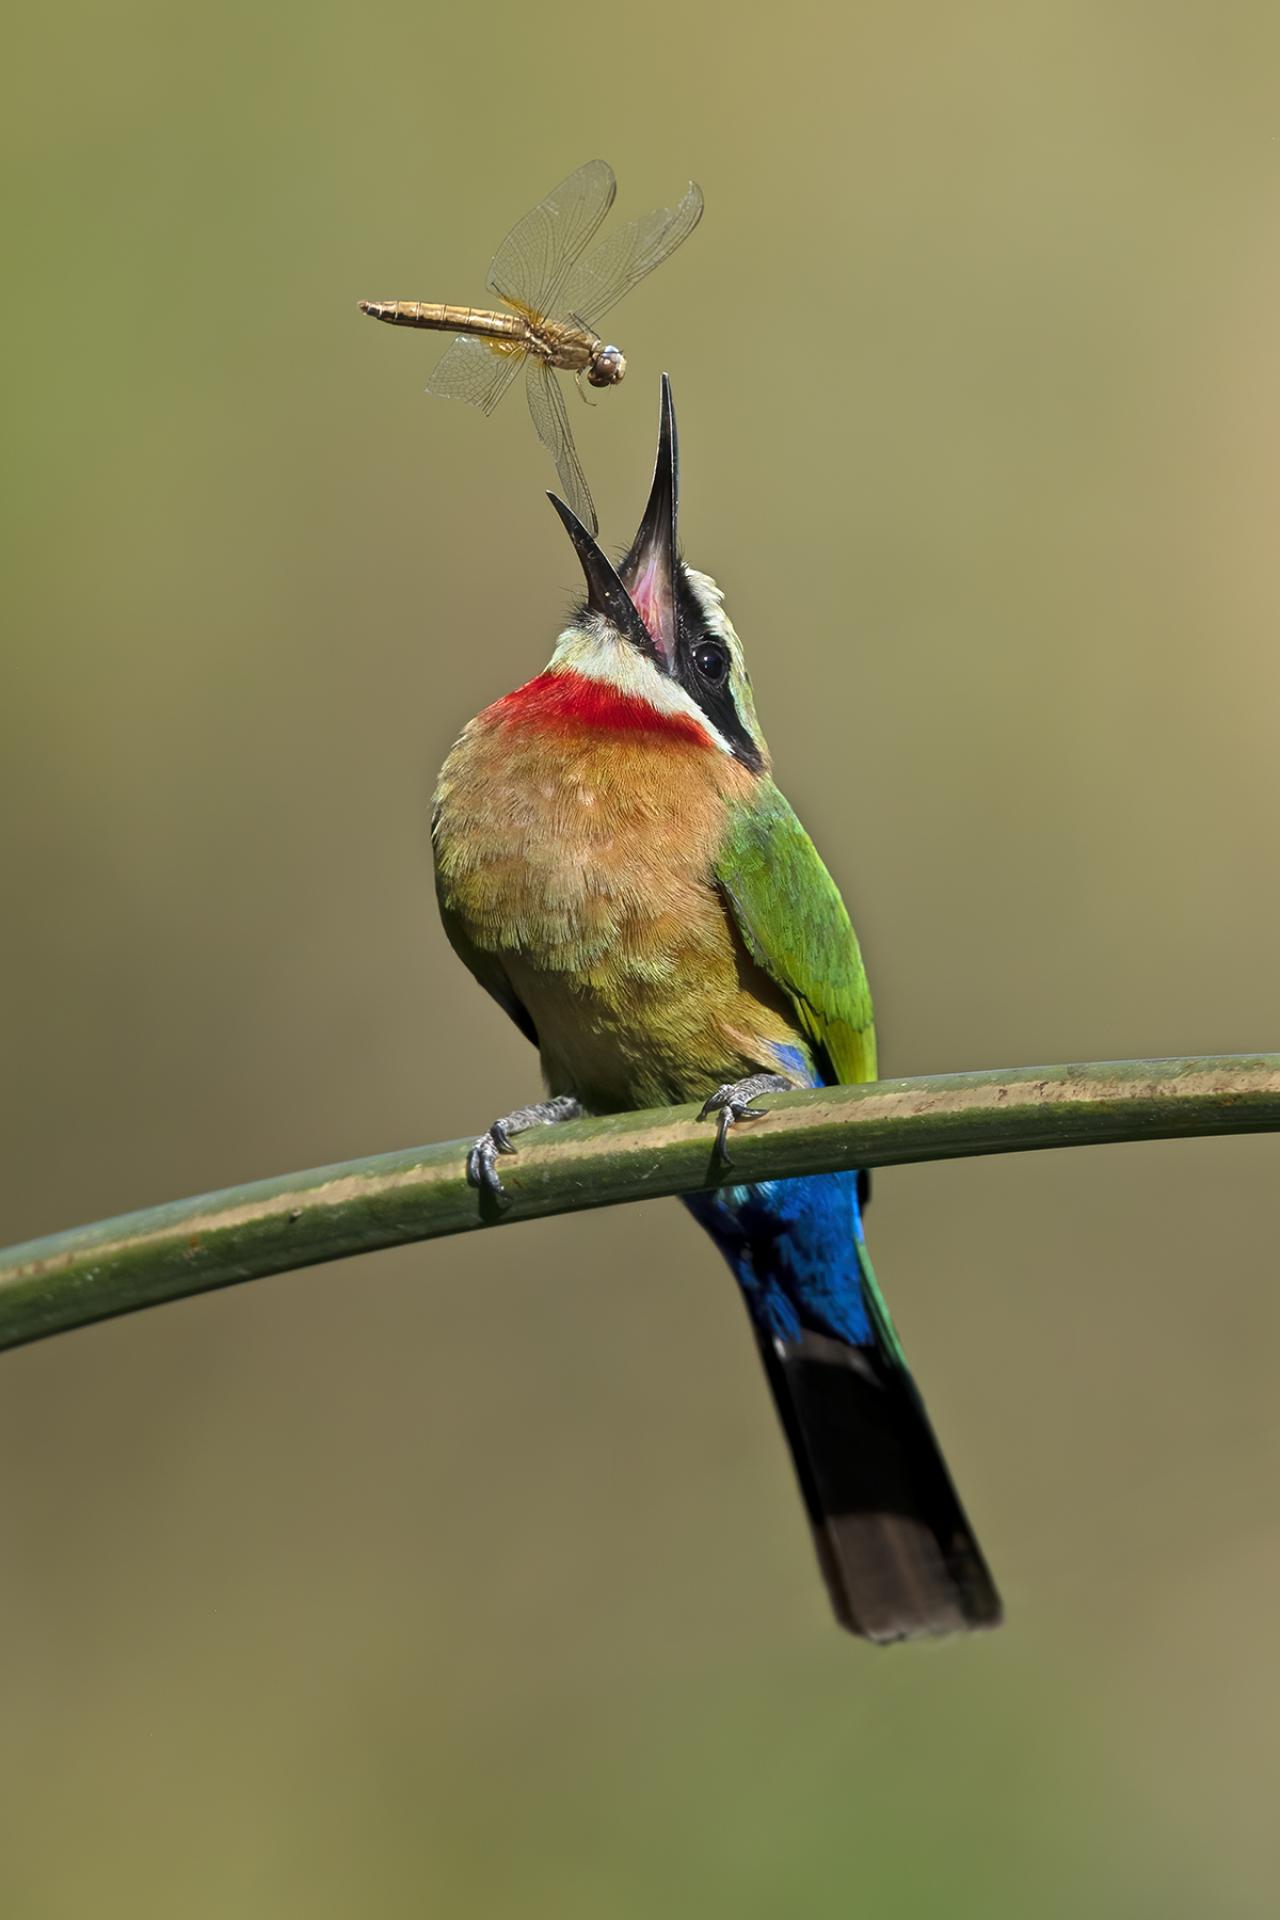 European Photography Awards Winner - The BeeEater and Dragonfly